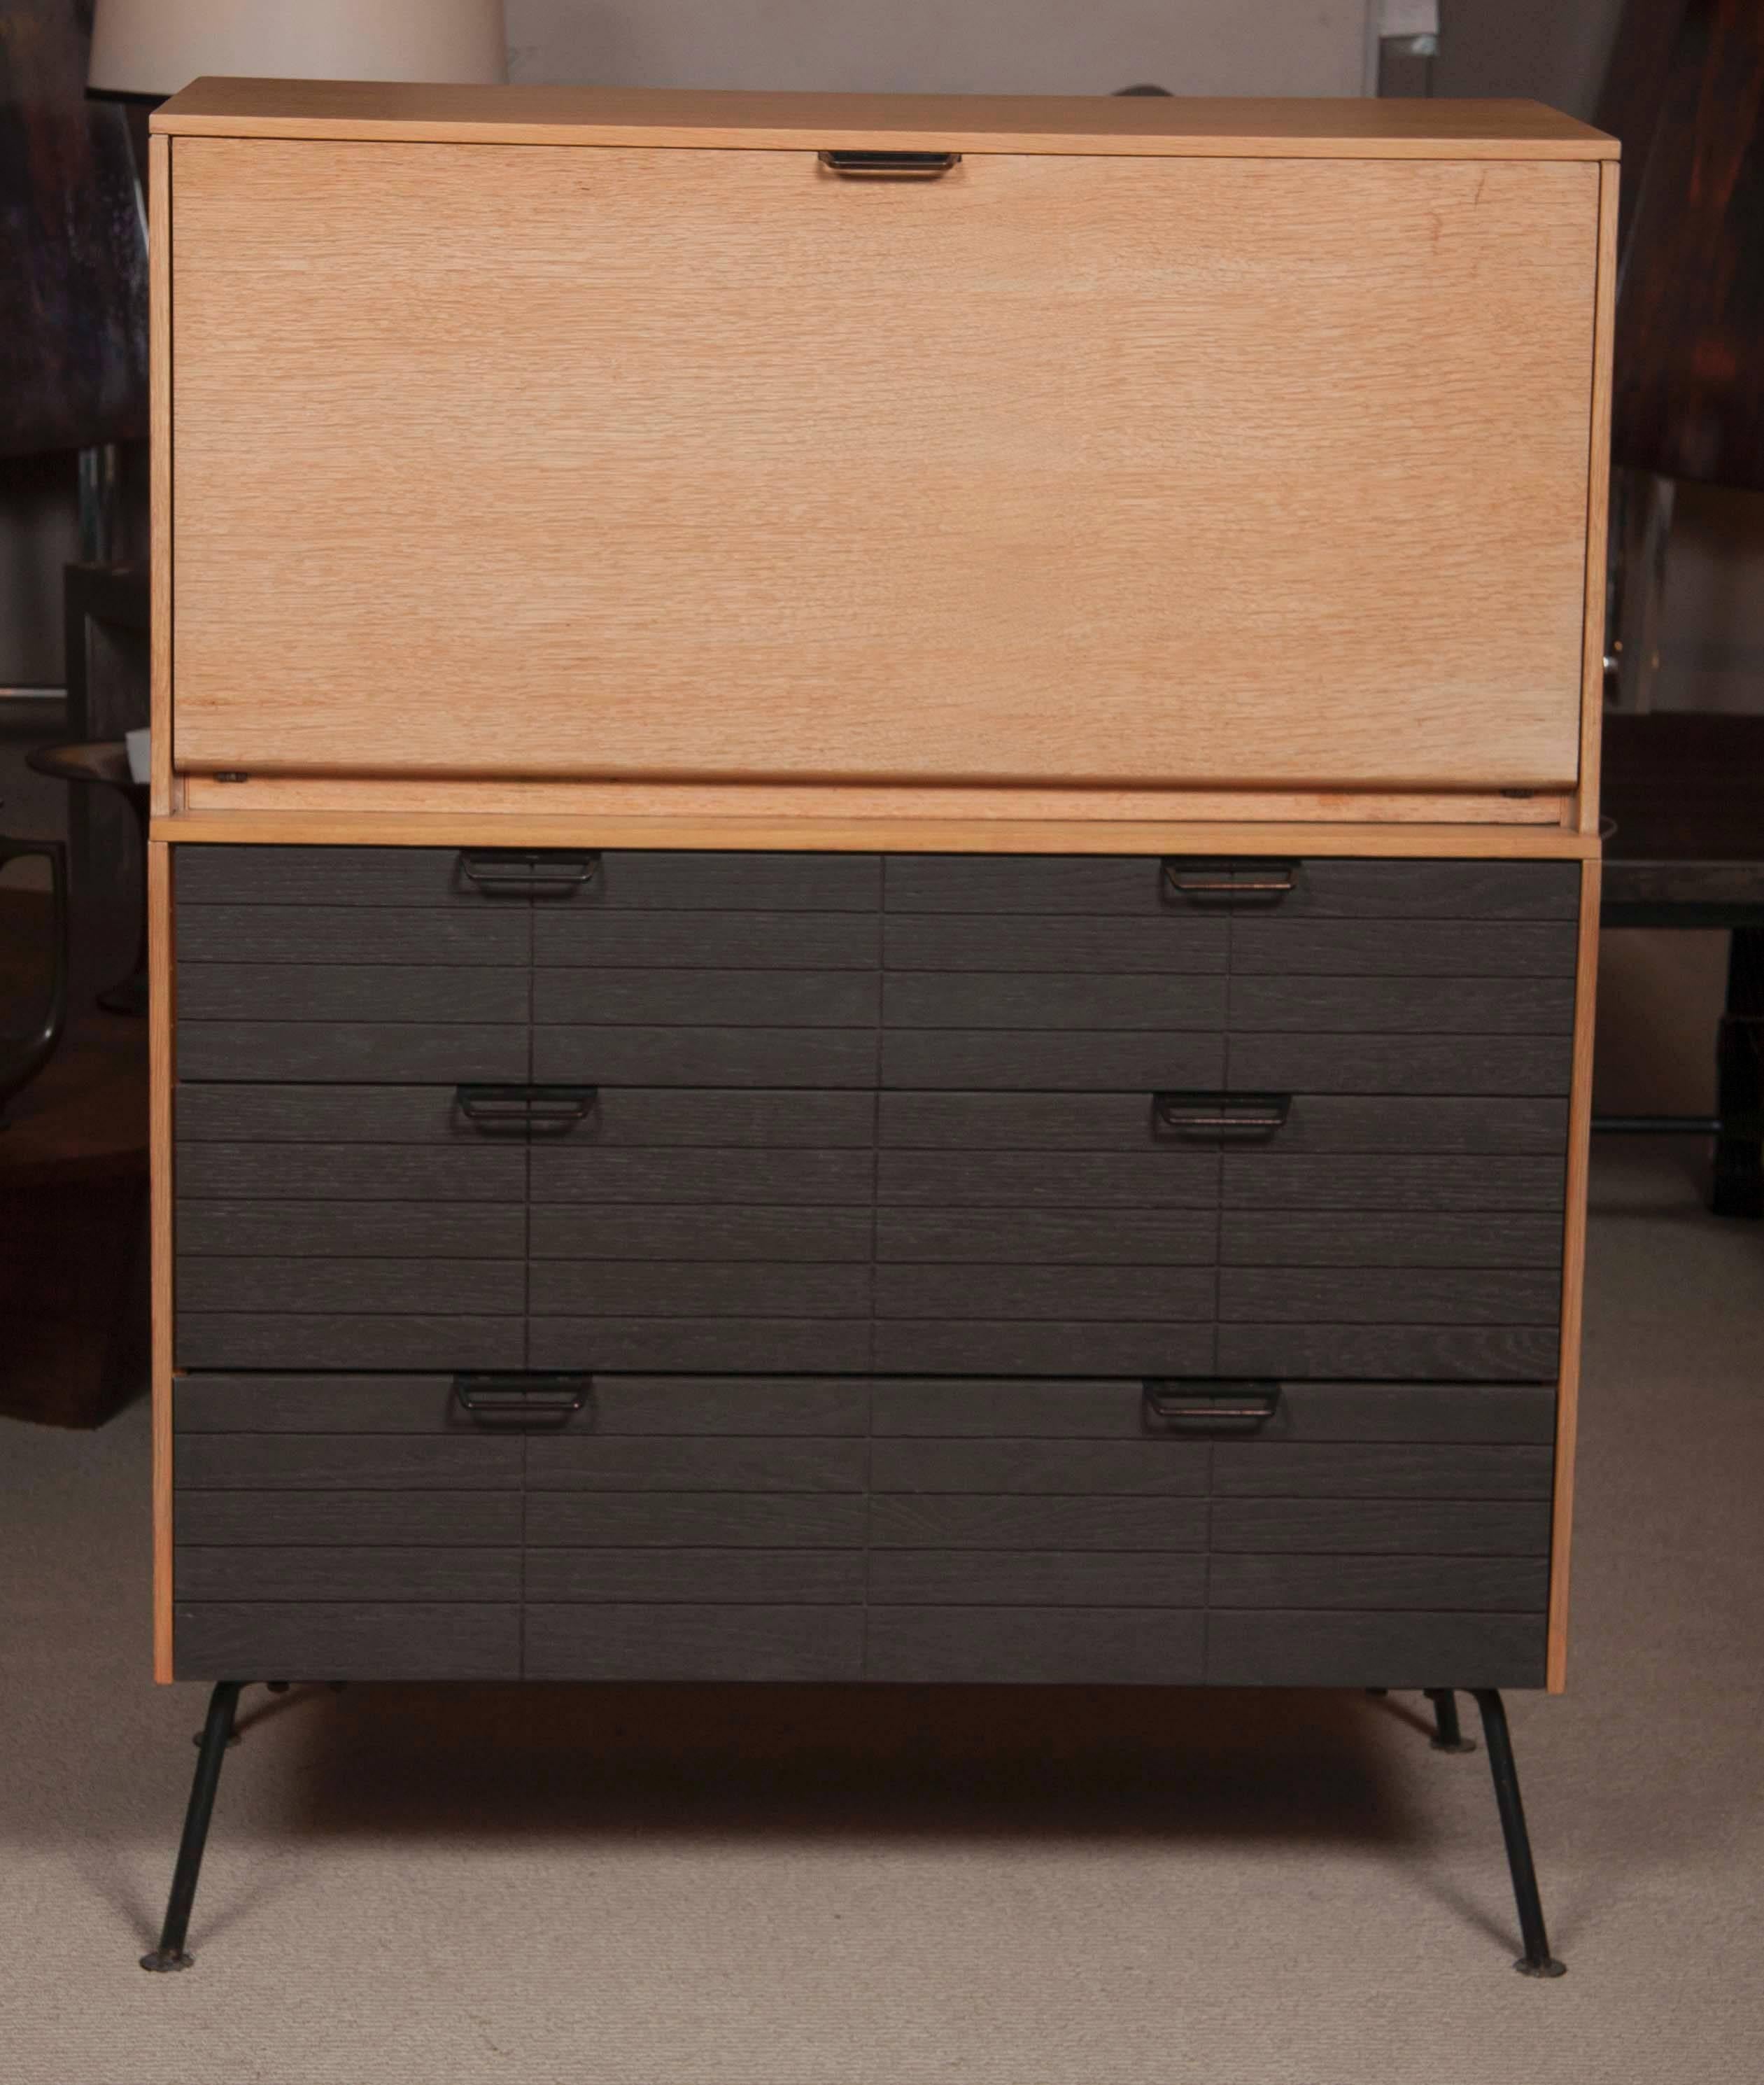 Beautiful design by French born - Raymond Lowey droptop desk with cerused outer box and drawers and original robin blue interiors. Ample storage space.
Black iron legs and handles. Perfectly restored, great look and character.